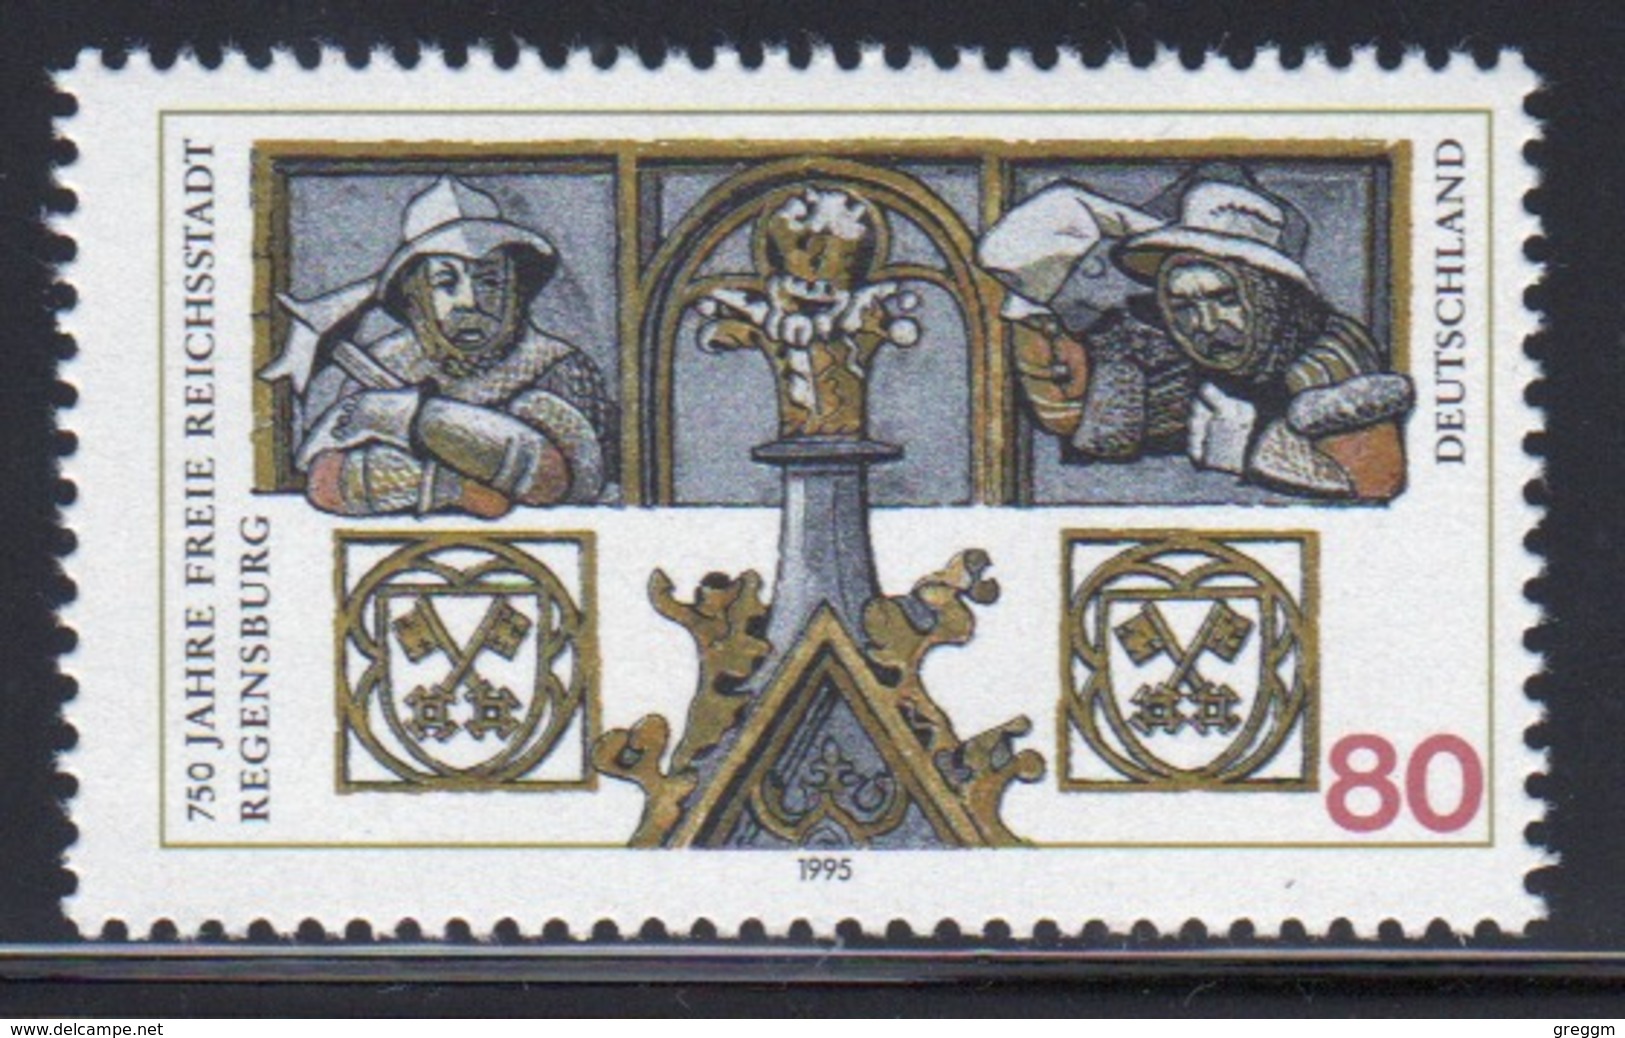 Germany 1995 Single Stamp To Celebrate The 750th Anniversary Of Regensburg. - Unused Stamps